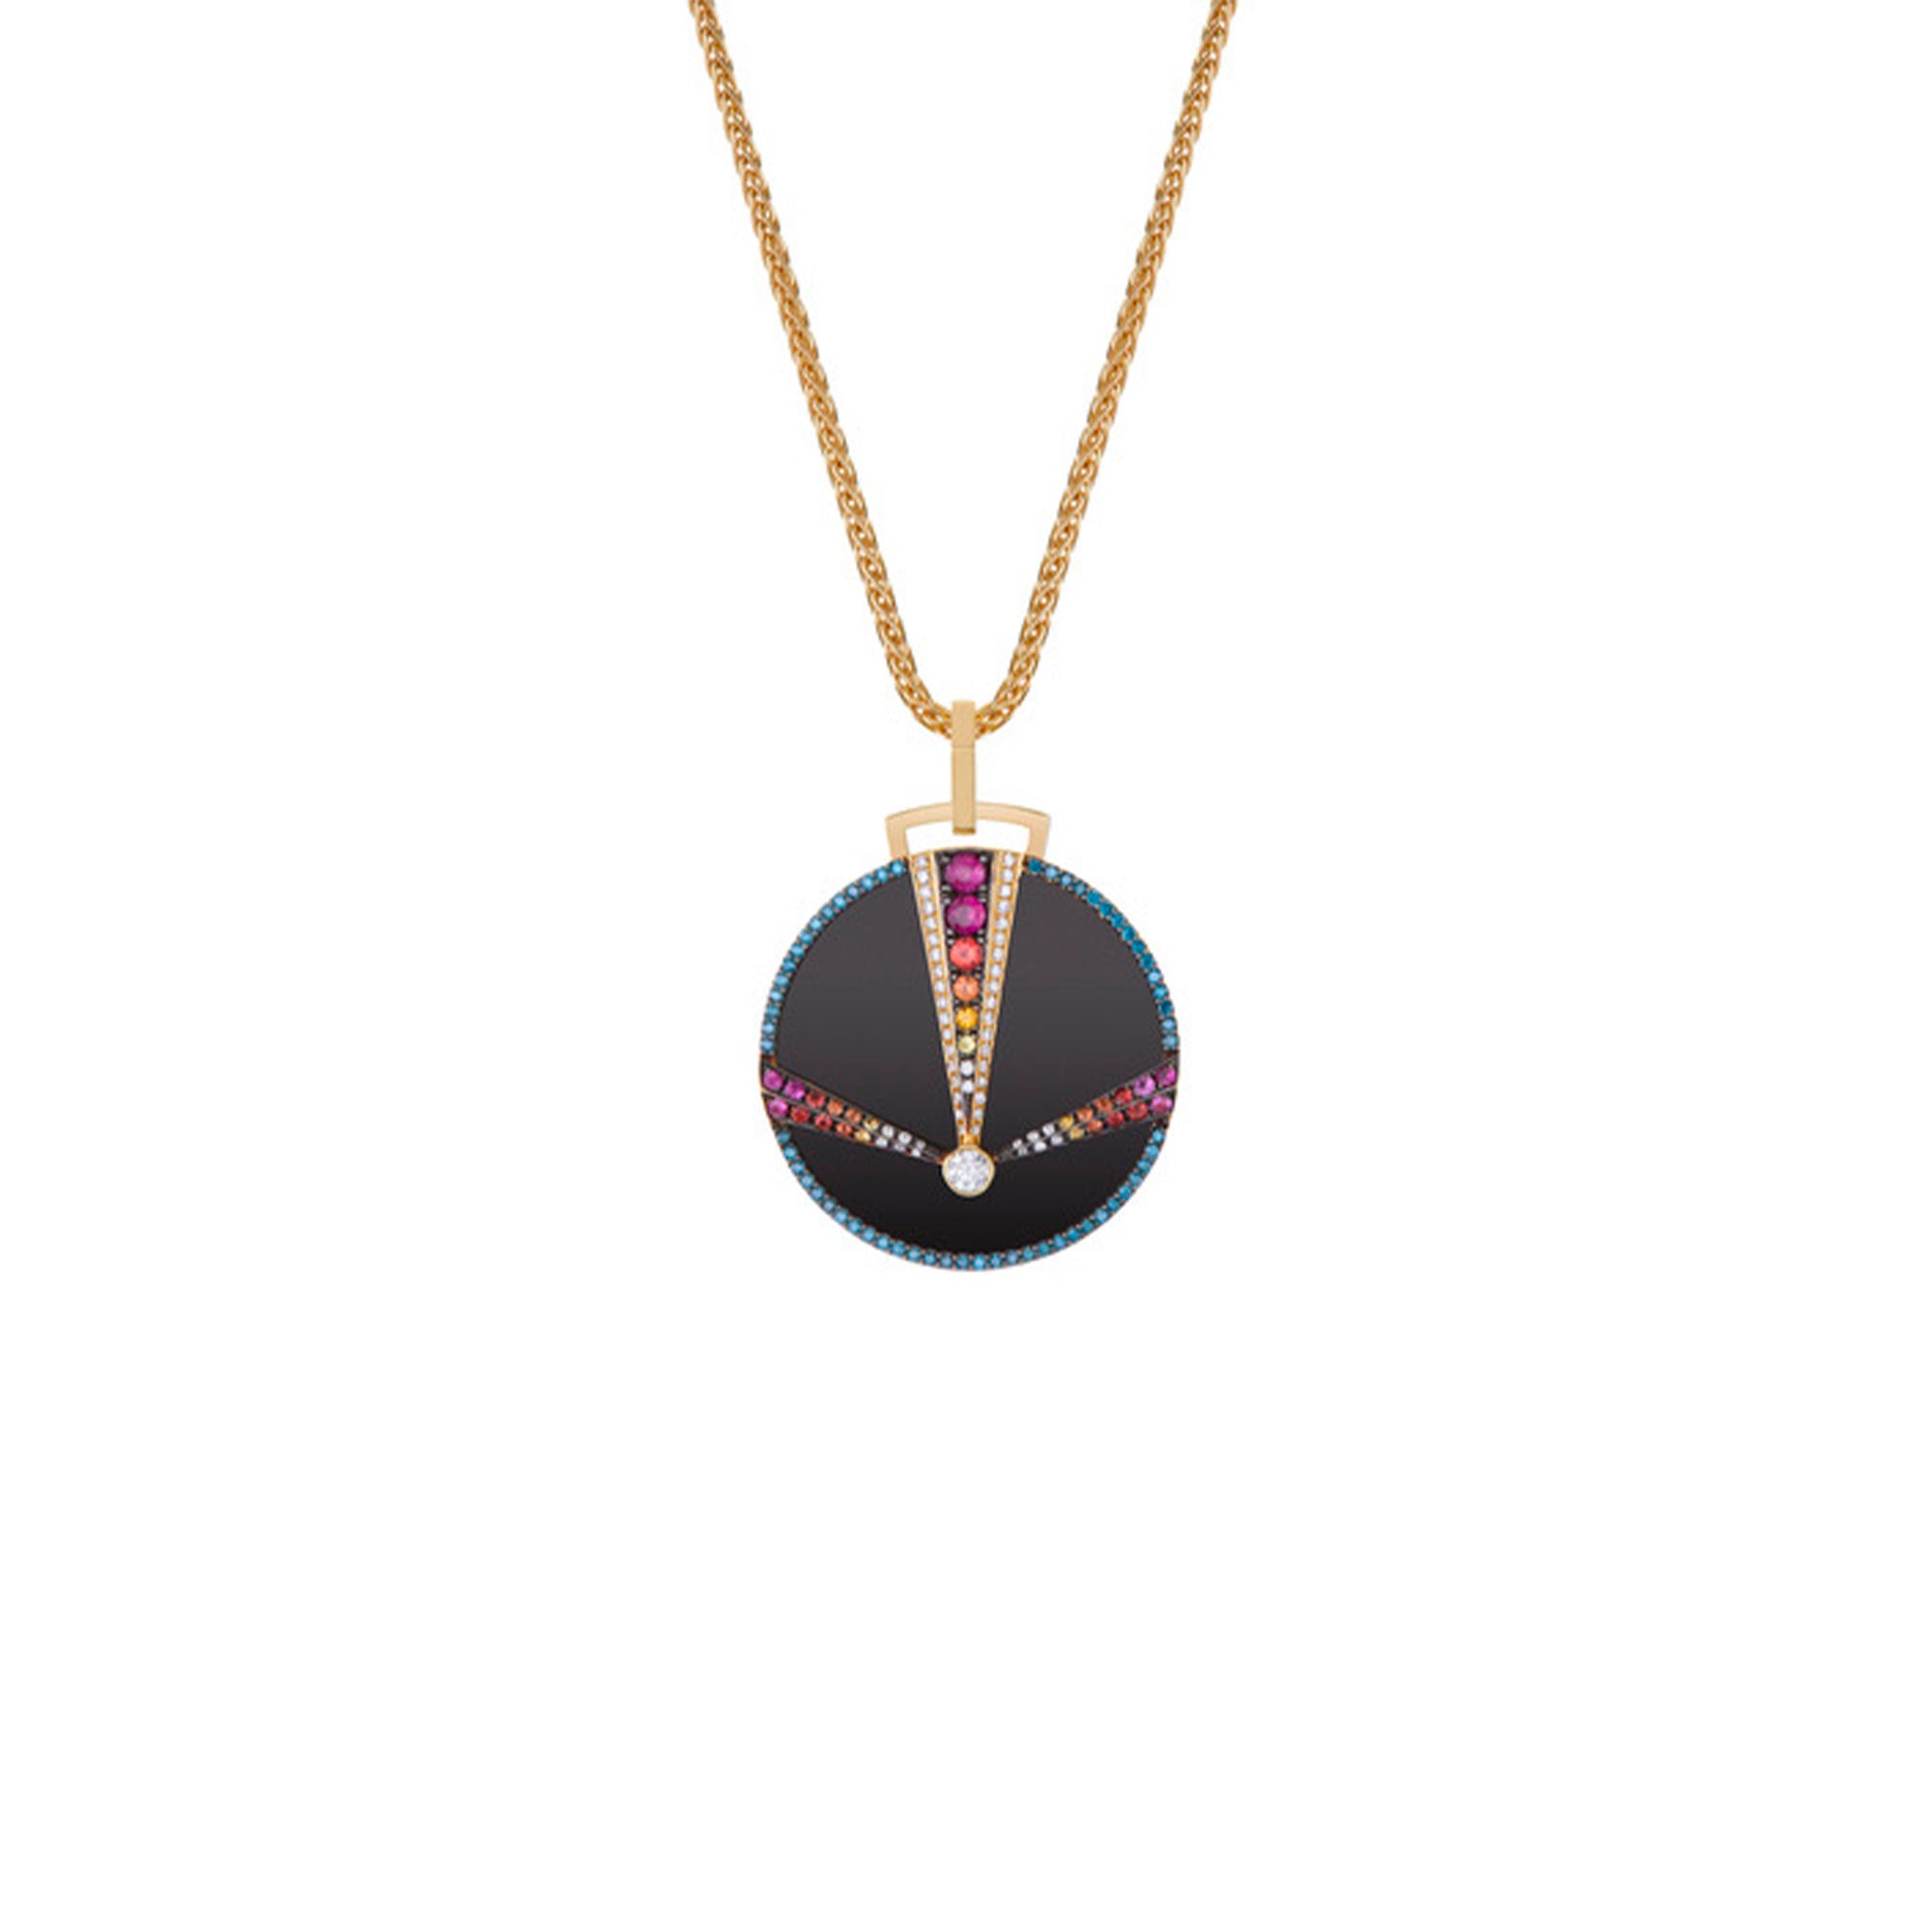 Enhanced Refraction Necklace